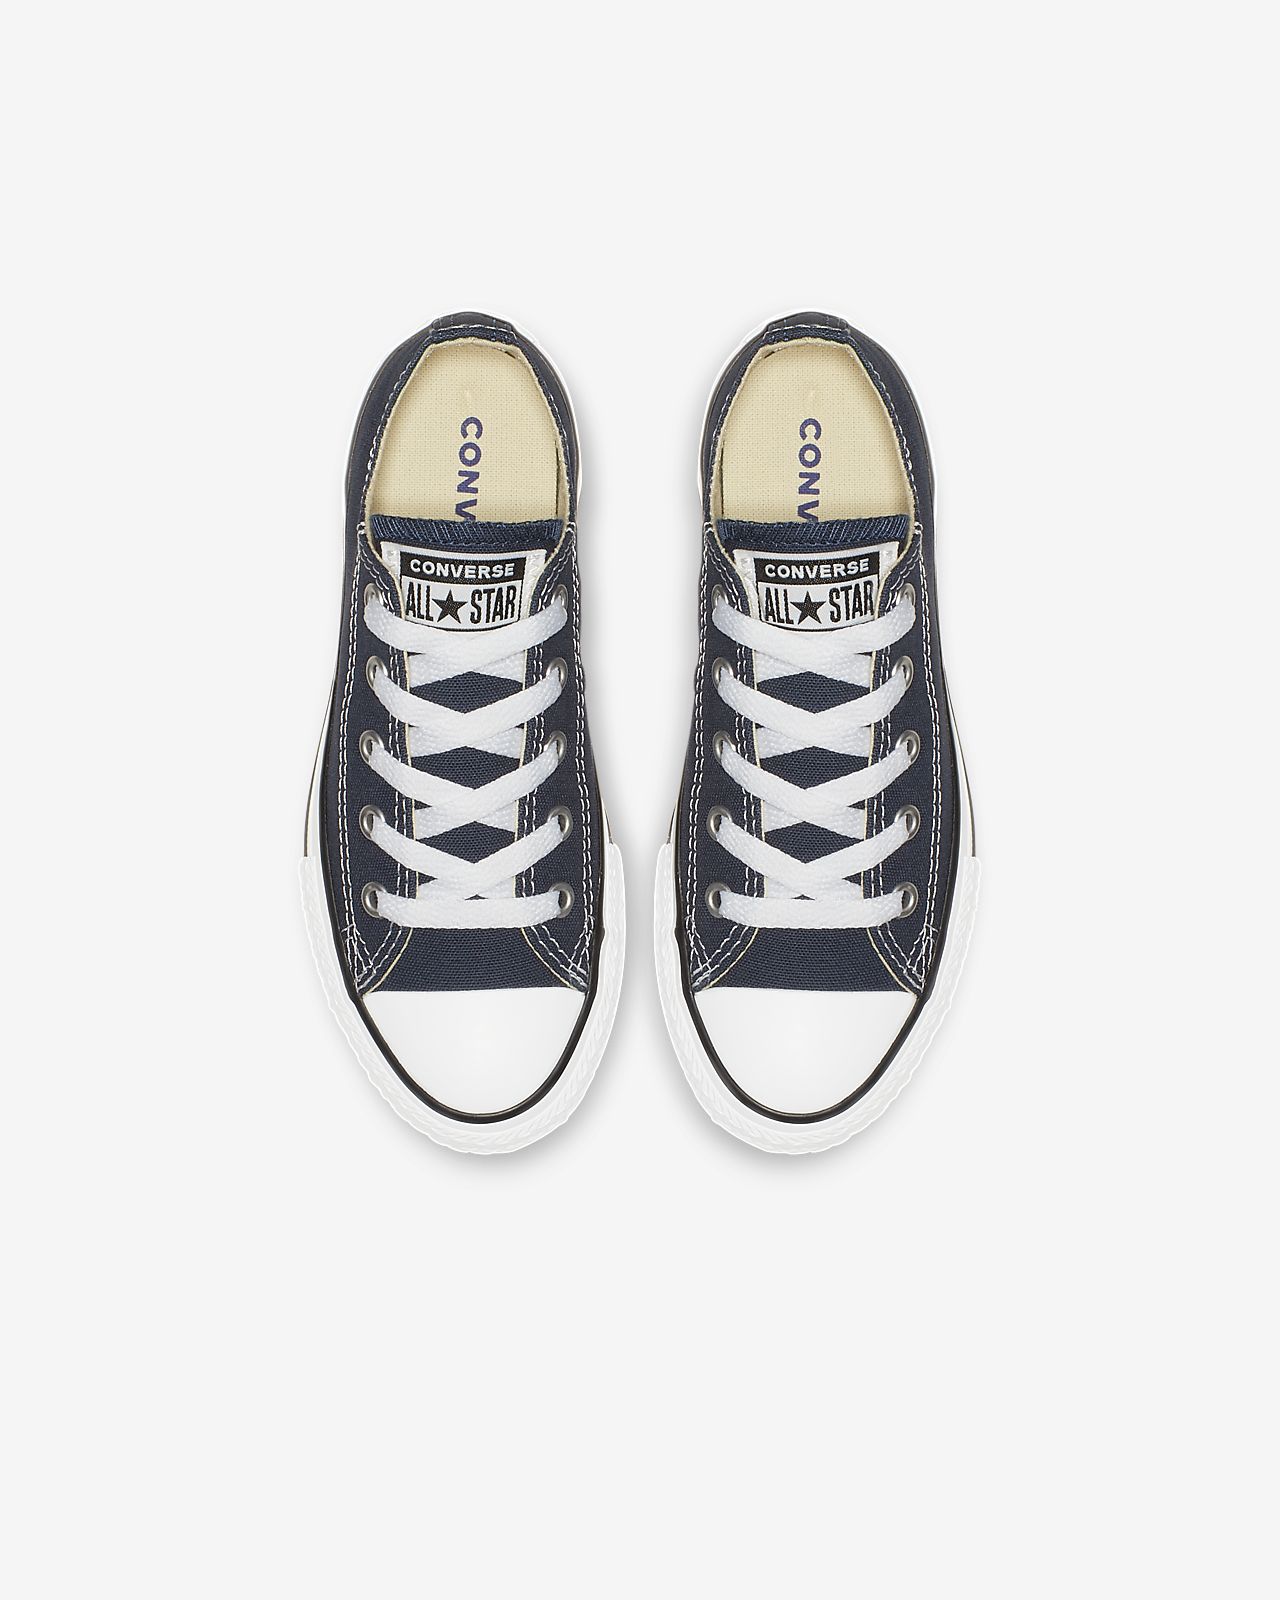 converse sneakers top view